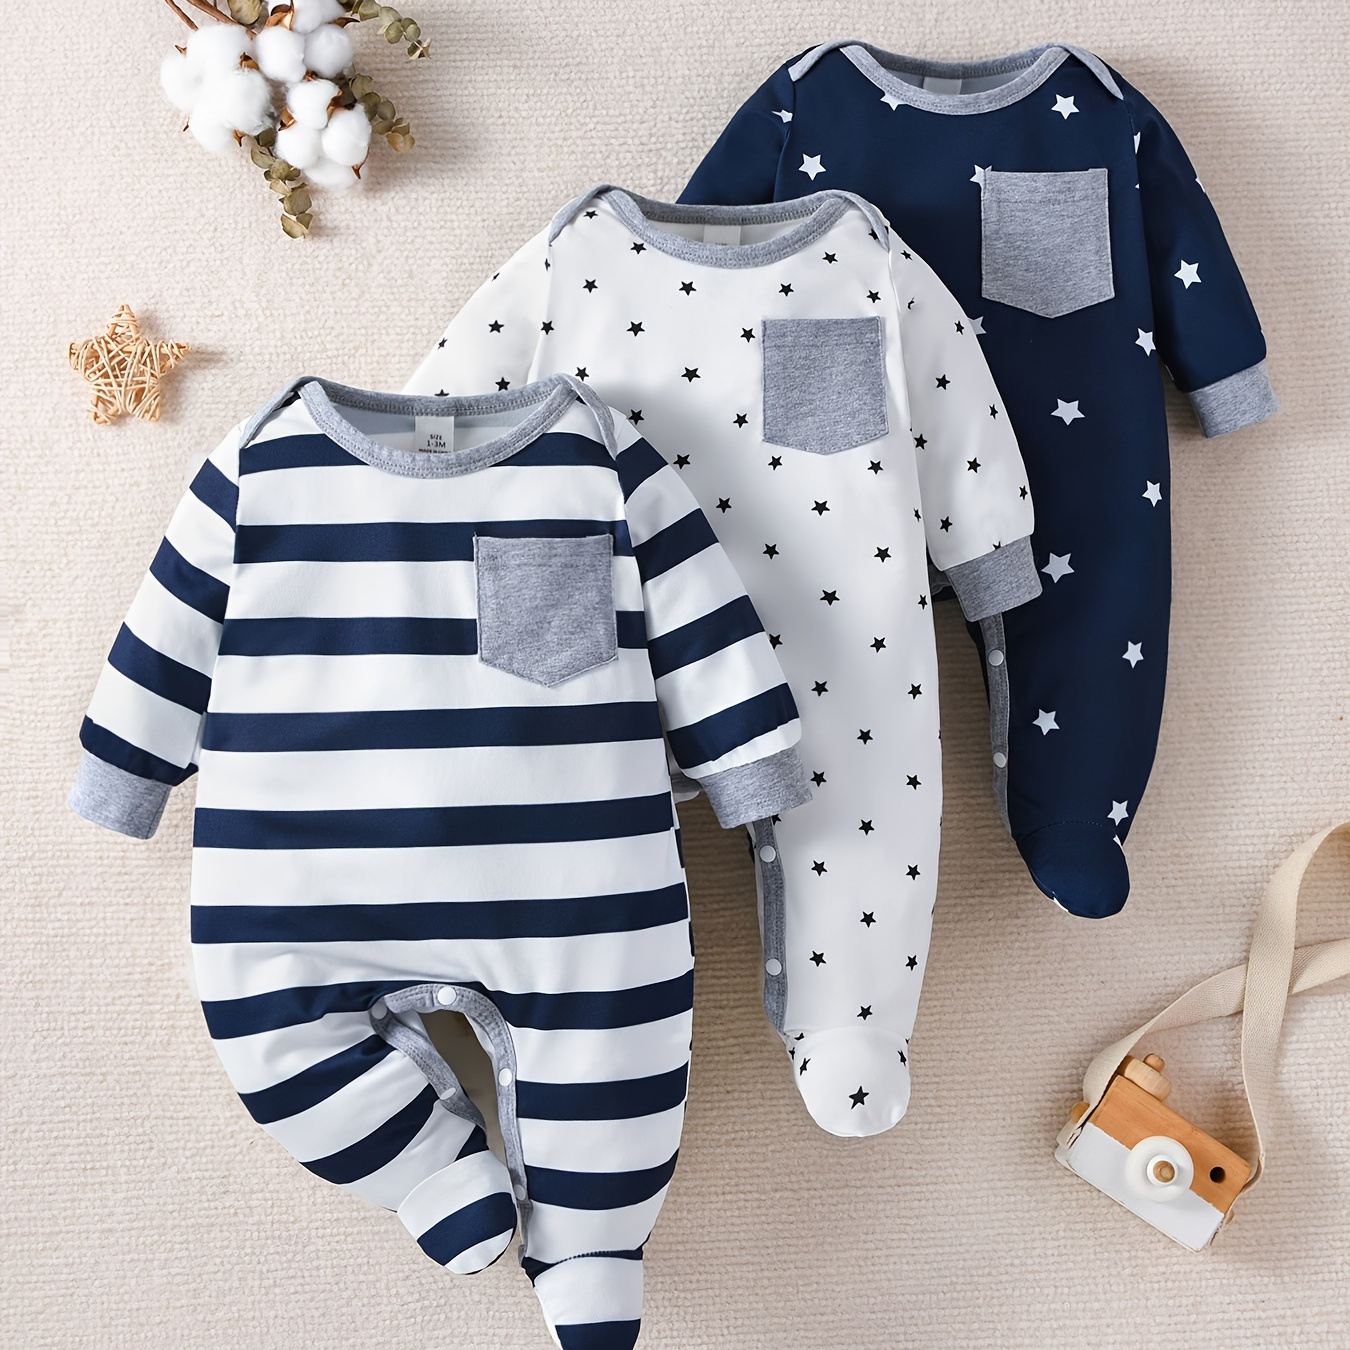 

3pcs Baby Boy's Footed Onesies, Casual Style Baby Rompers With Stripes And Star Patterns, Infant Long-sleeve Sleep & Play Outfits With Front Pocket